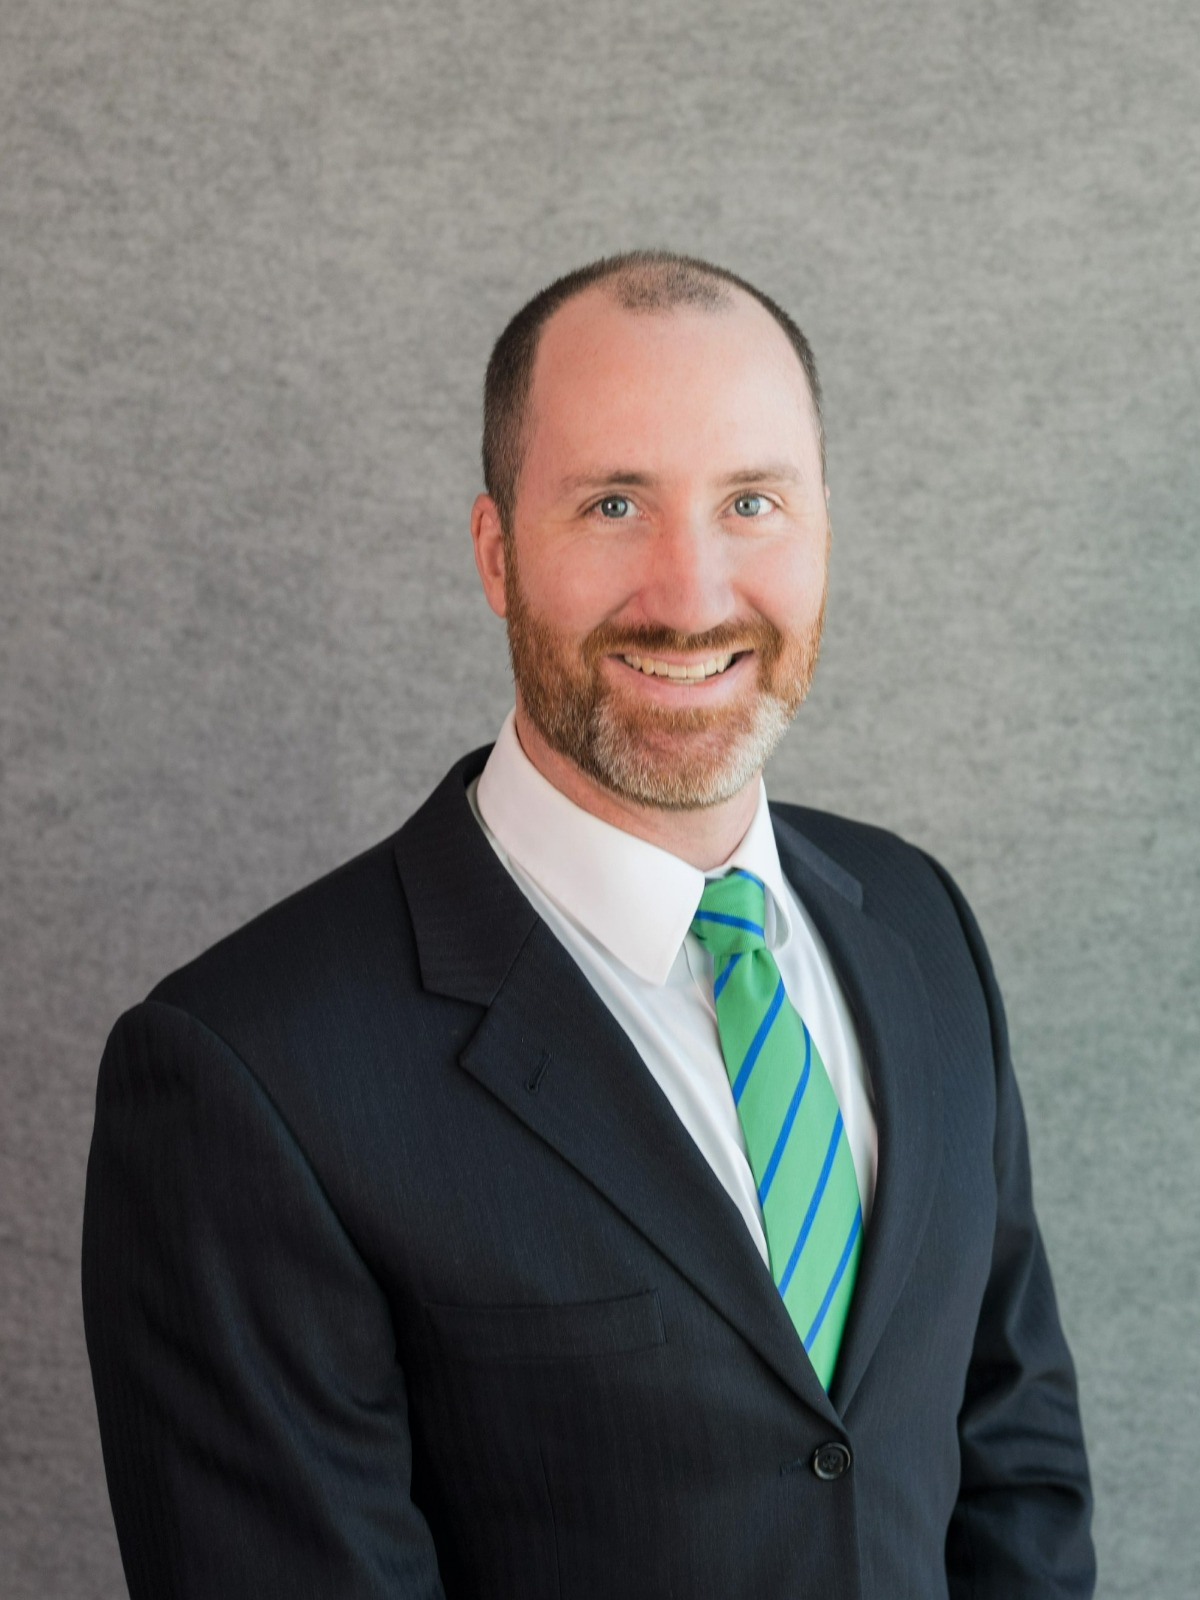 Rob Breunig of Adams and Reese LLP is a member of XPX Nashville